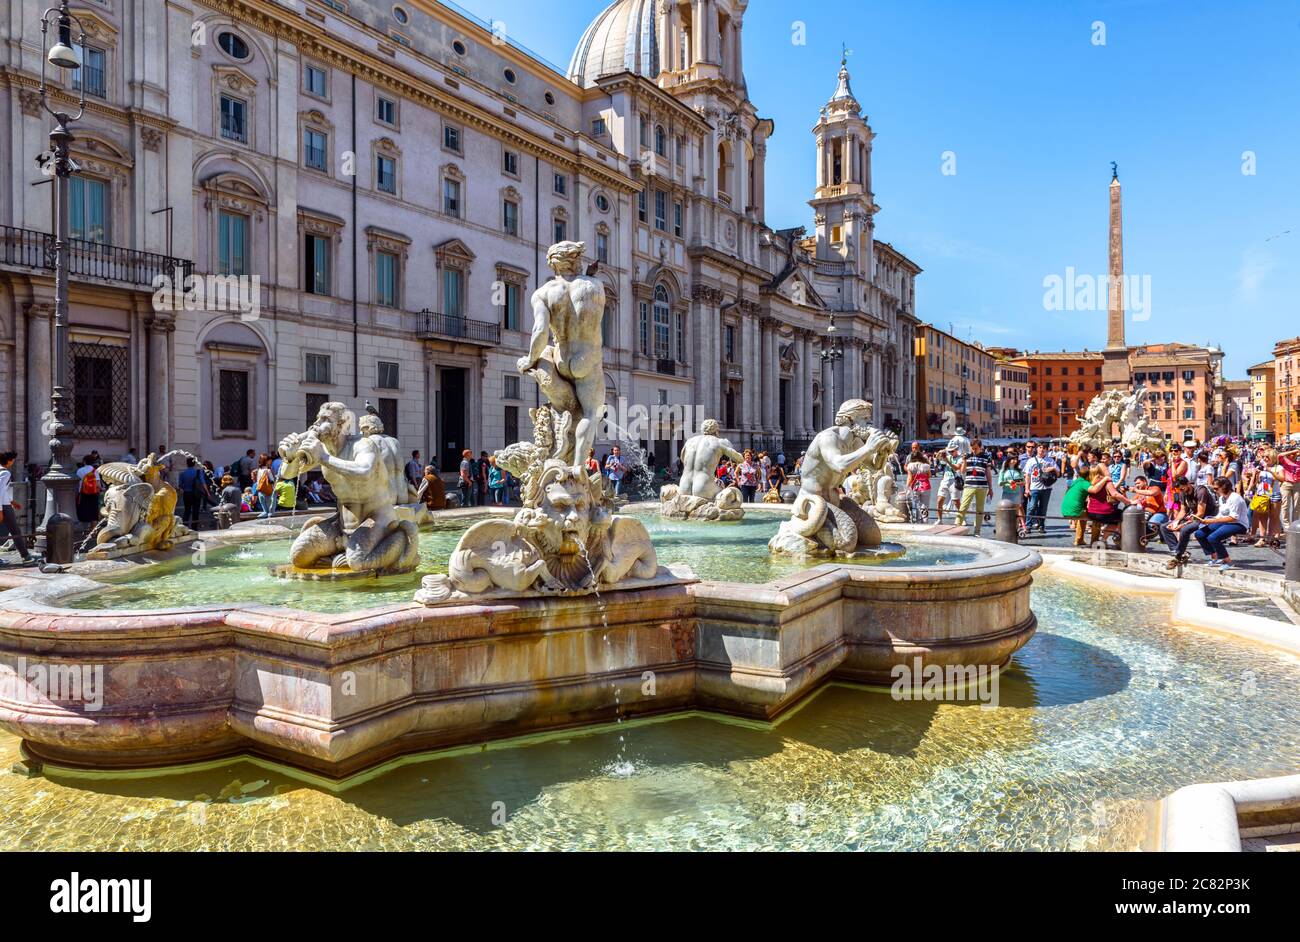 Rome - May 9, 2014: Beautiful Fontana del Moro or Moor Fountain on Piazza Navona, Rome, Italy. Navona square is one of main tourist attractions of Rom Stock Photo